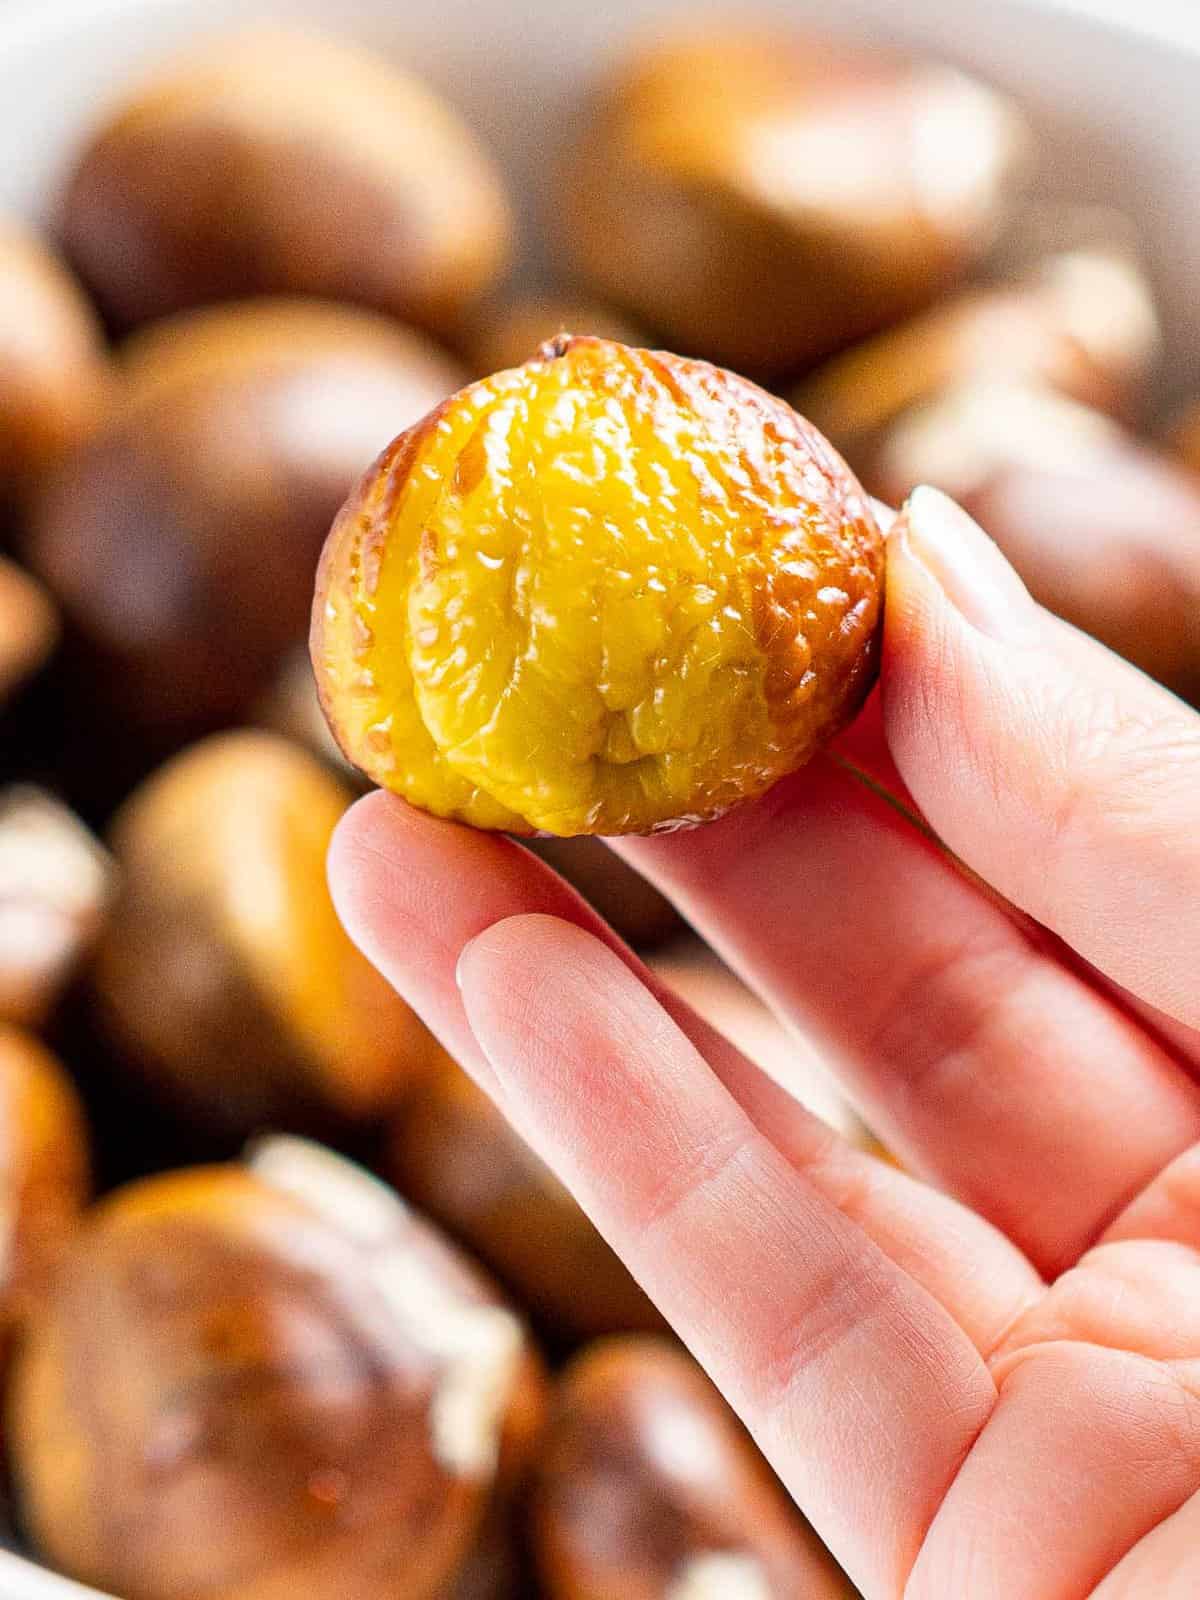 Peeled roasted chestnut held in hand.